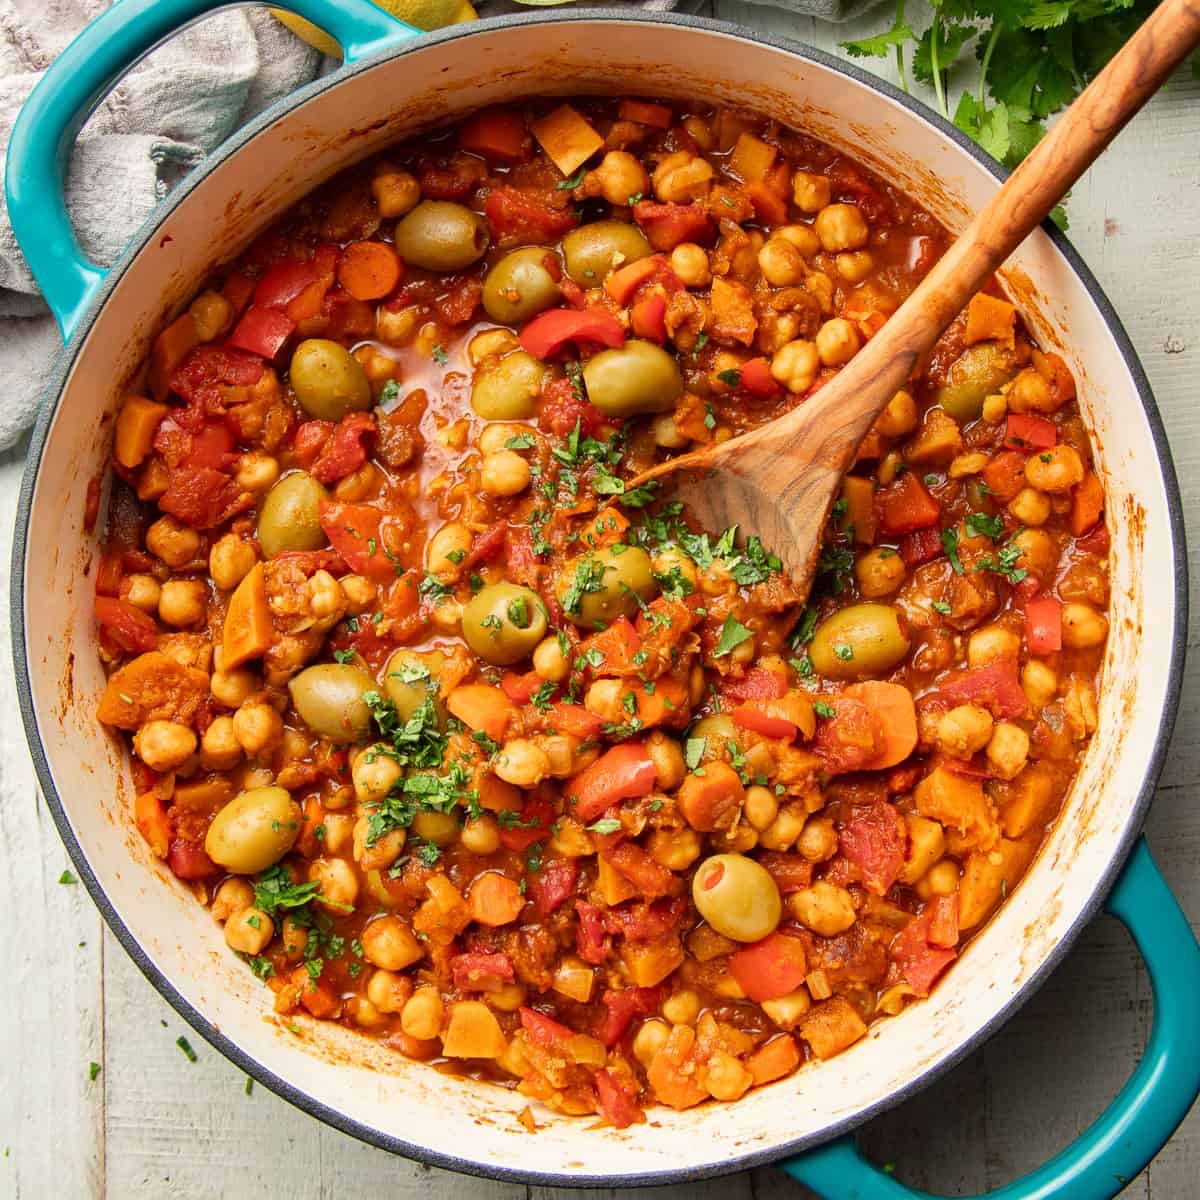 Pot of Vegan Tagine with a wooden spoon.